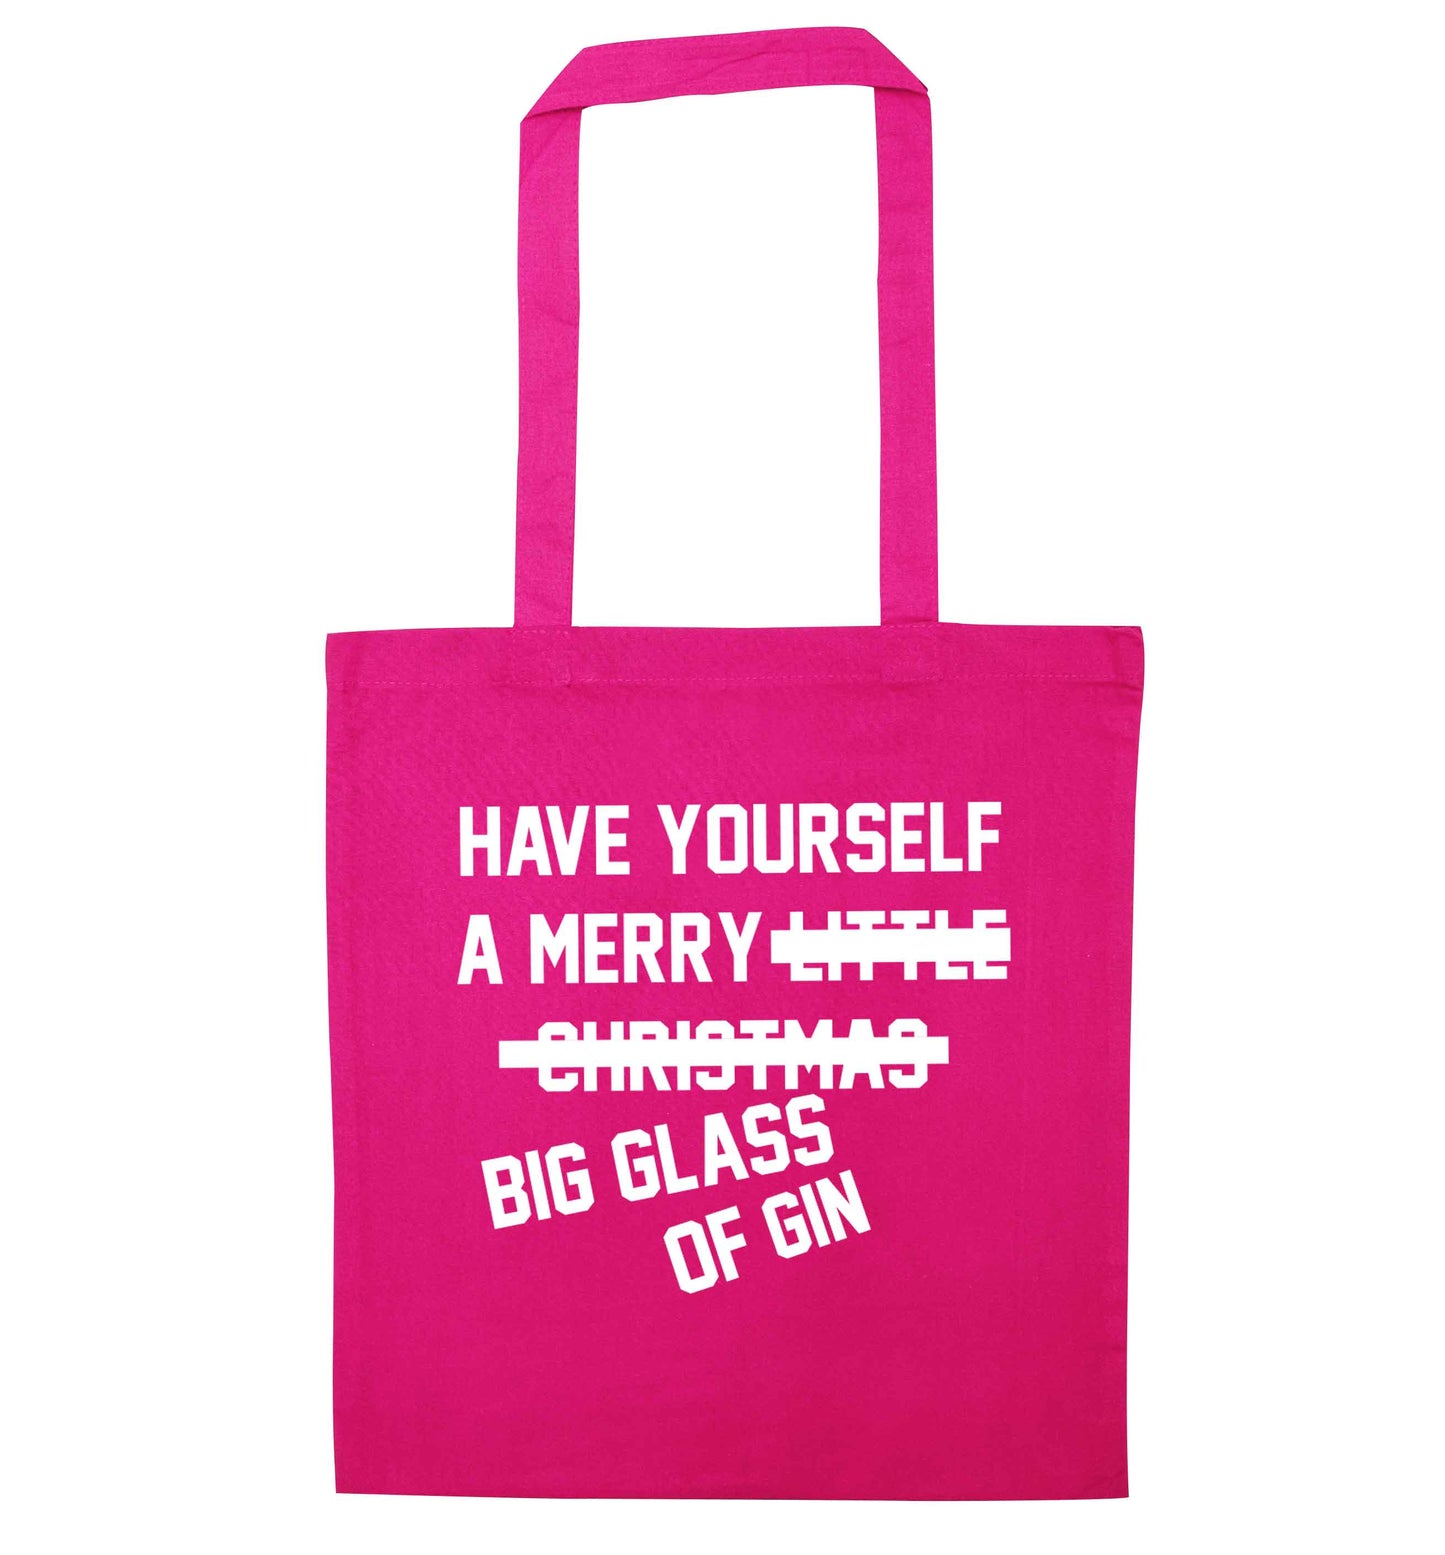 Have yourself a merry big glass of gin pink tote bag